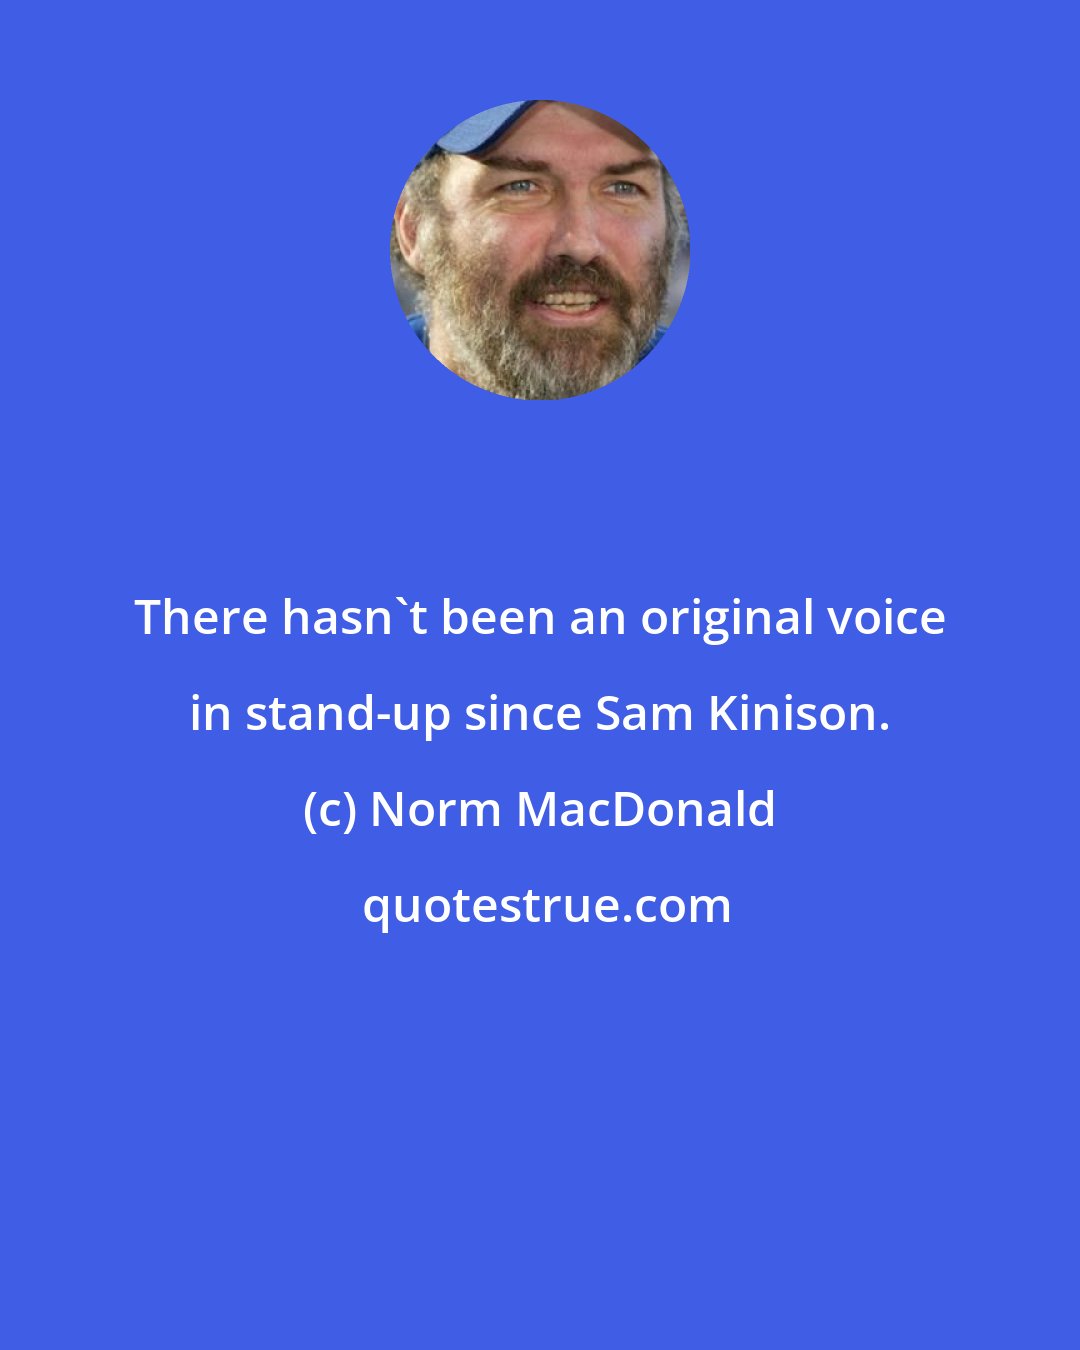 Norm MacDonald: There hasn't been an original voice in stand-up since Sam Kinison.